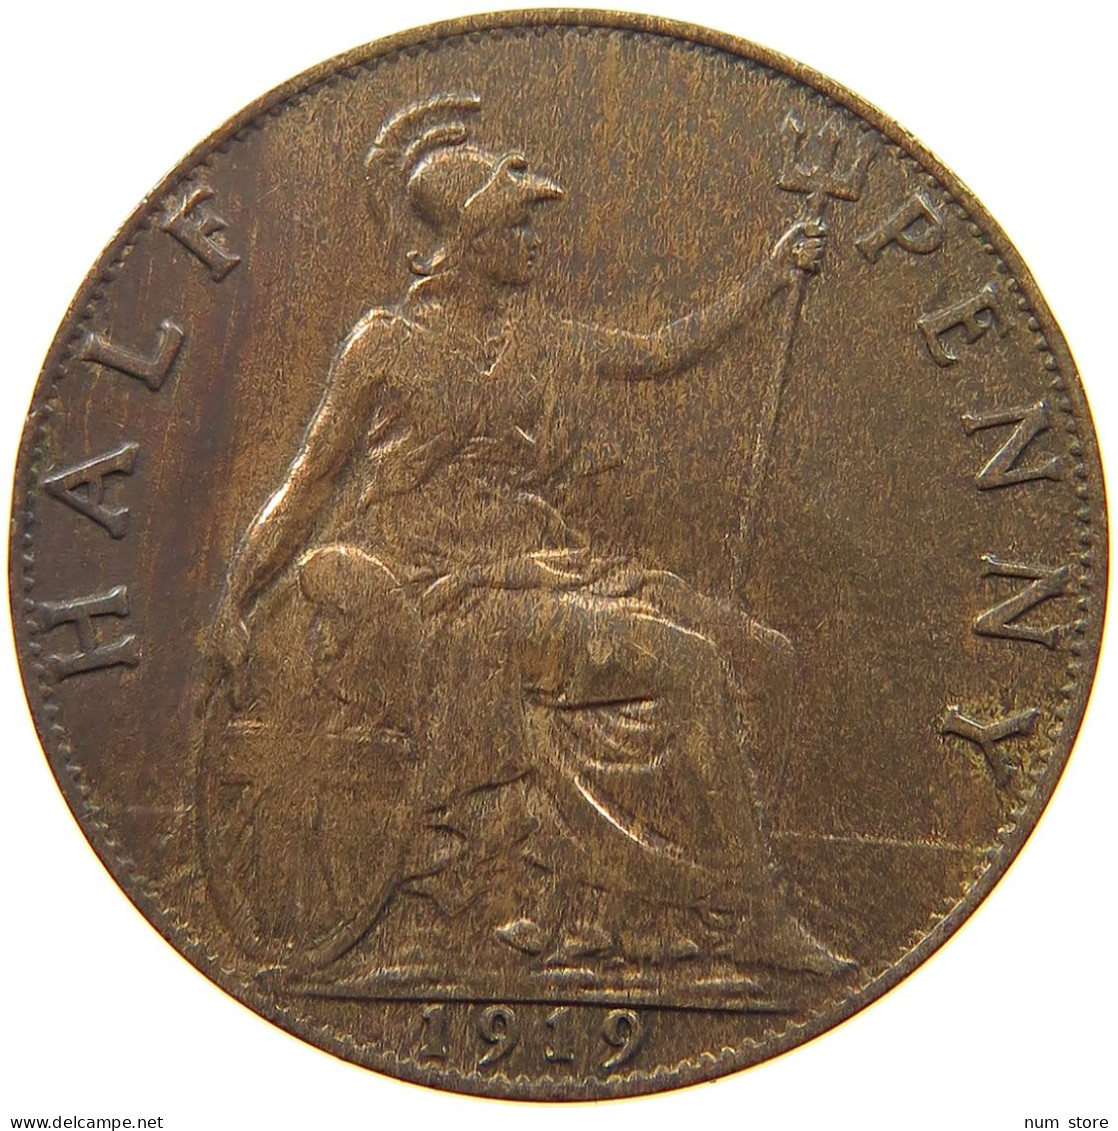 GREAT BRITAIN HALFPENNY 1919 George V. (1910-1936) #a002 0429 - C. 1/2 Penny